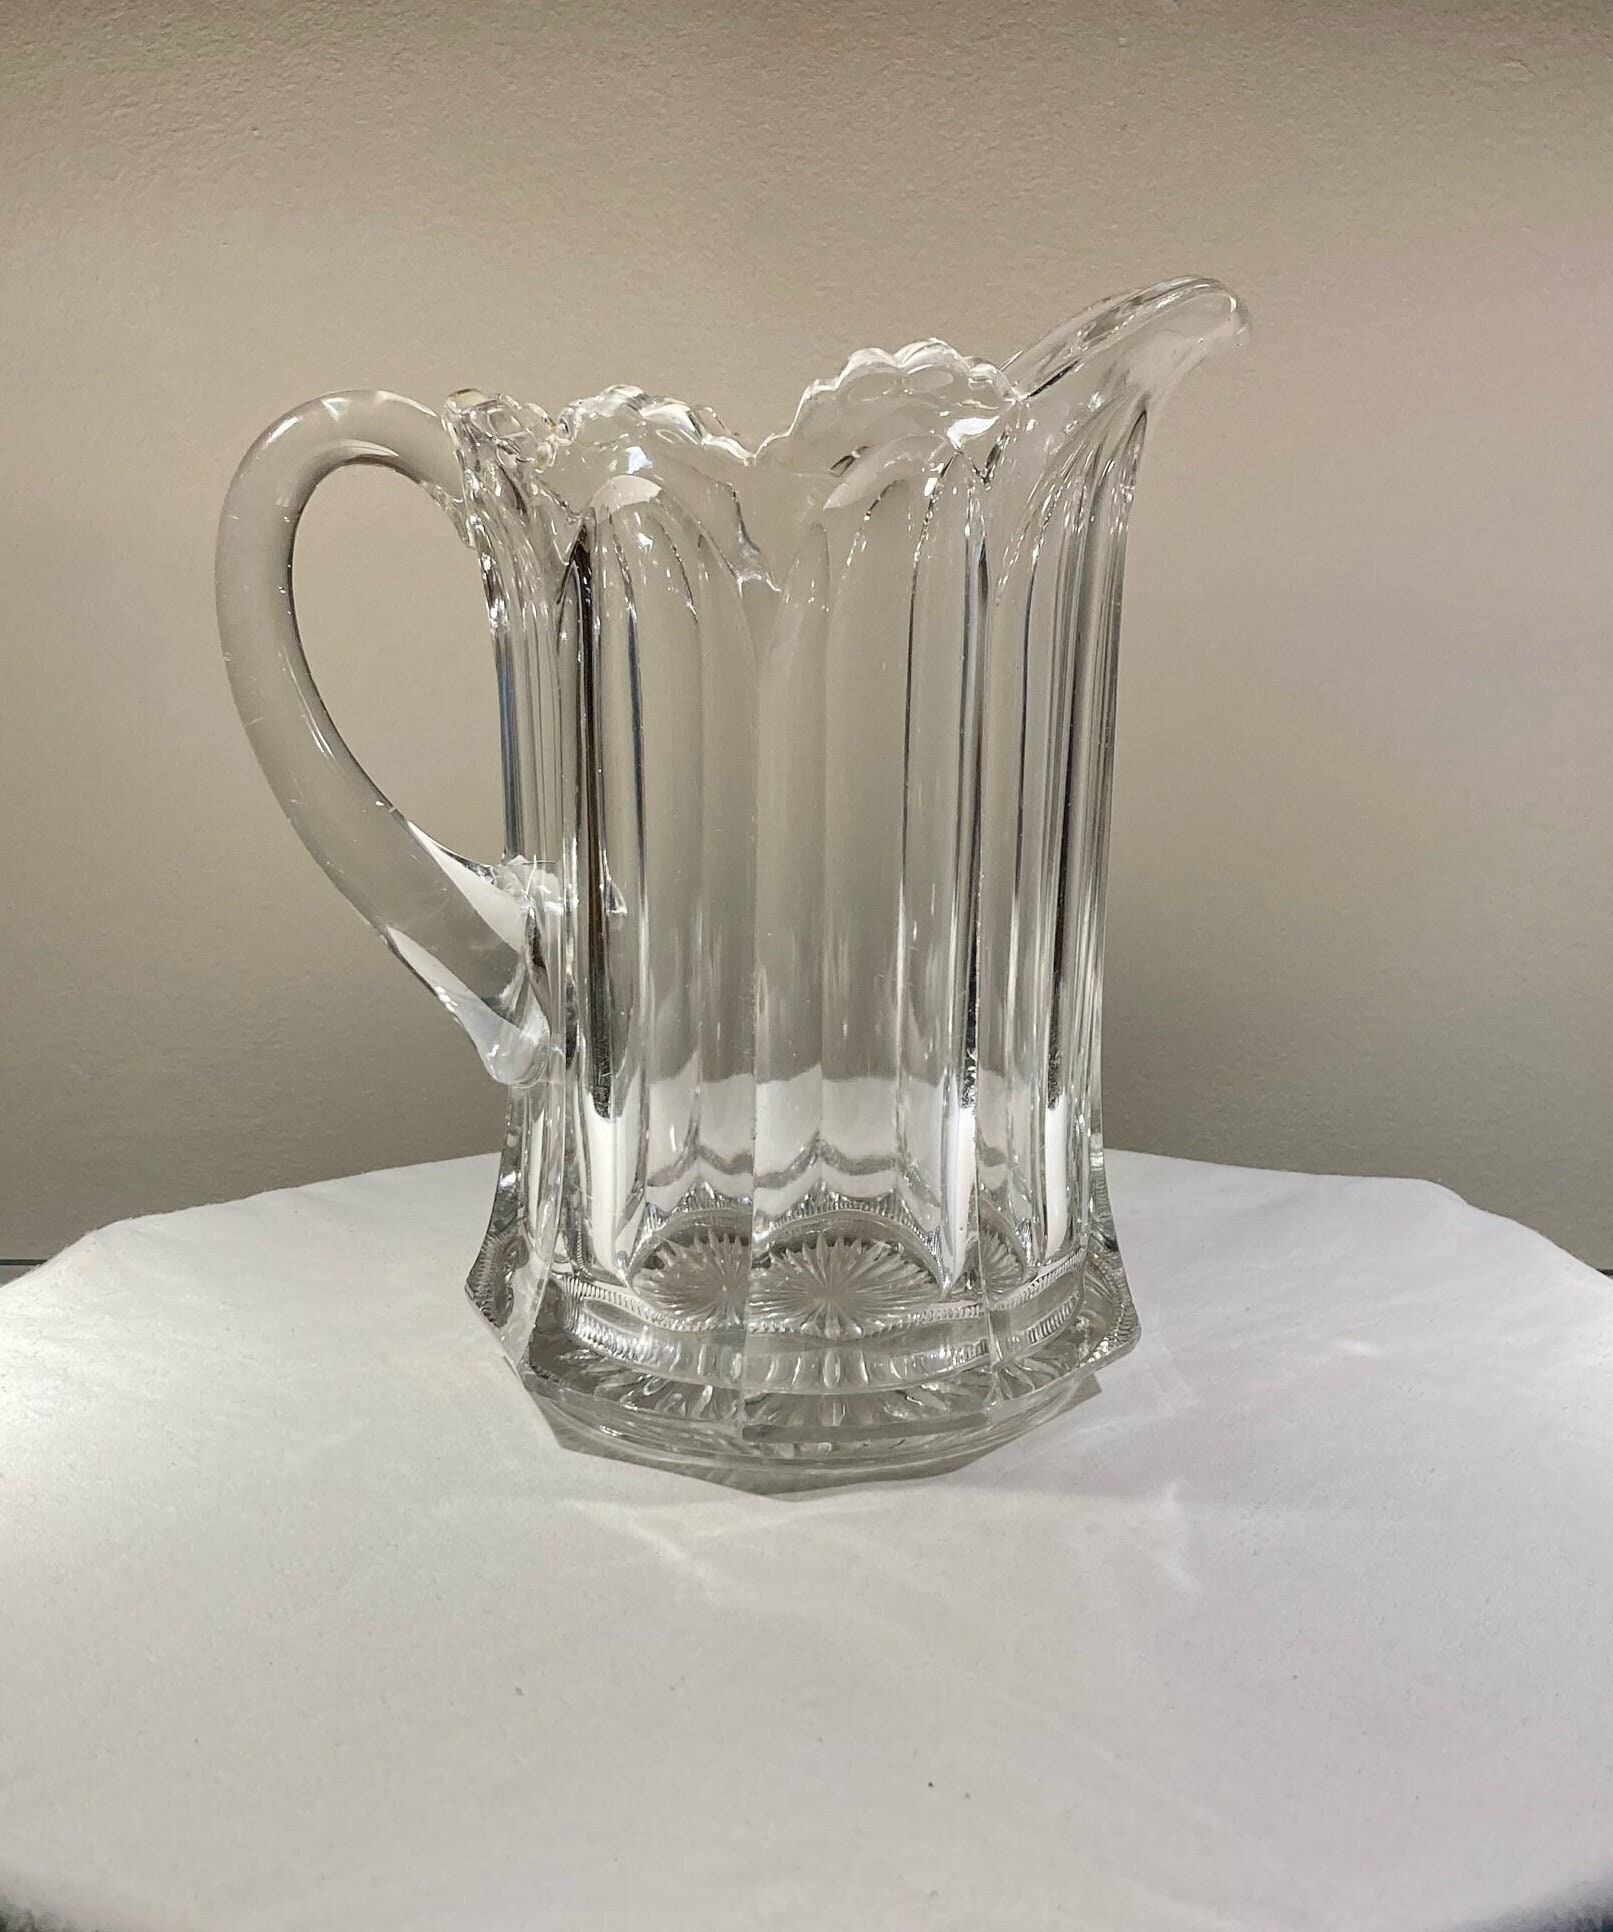 Hot Sell Elegant Diamond Design Water Pitcher with Handle Glass